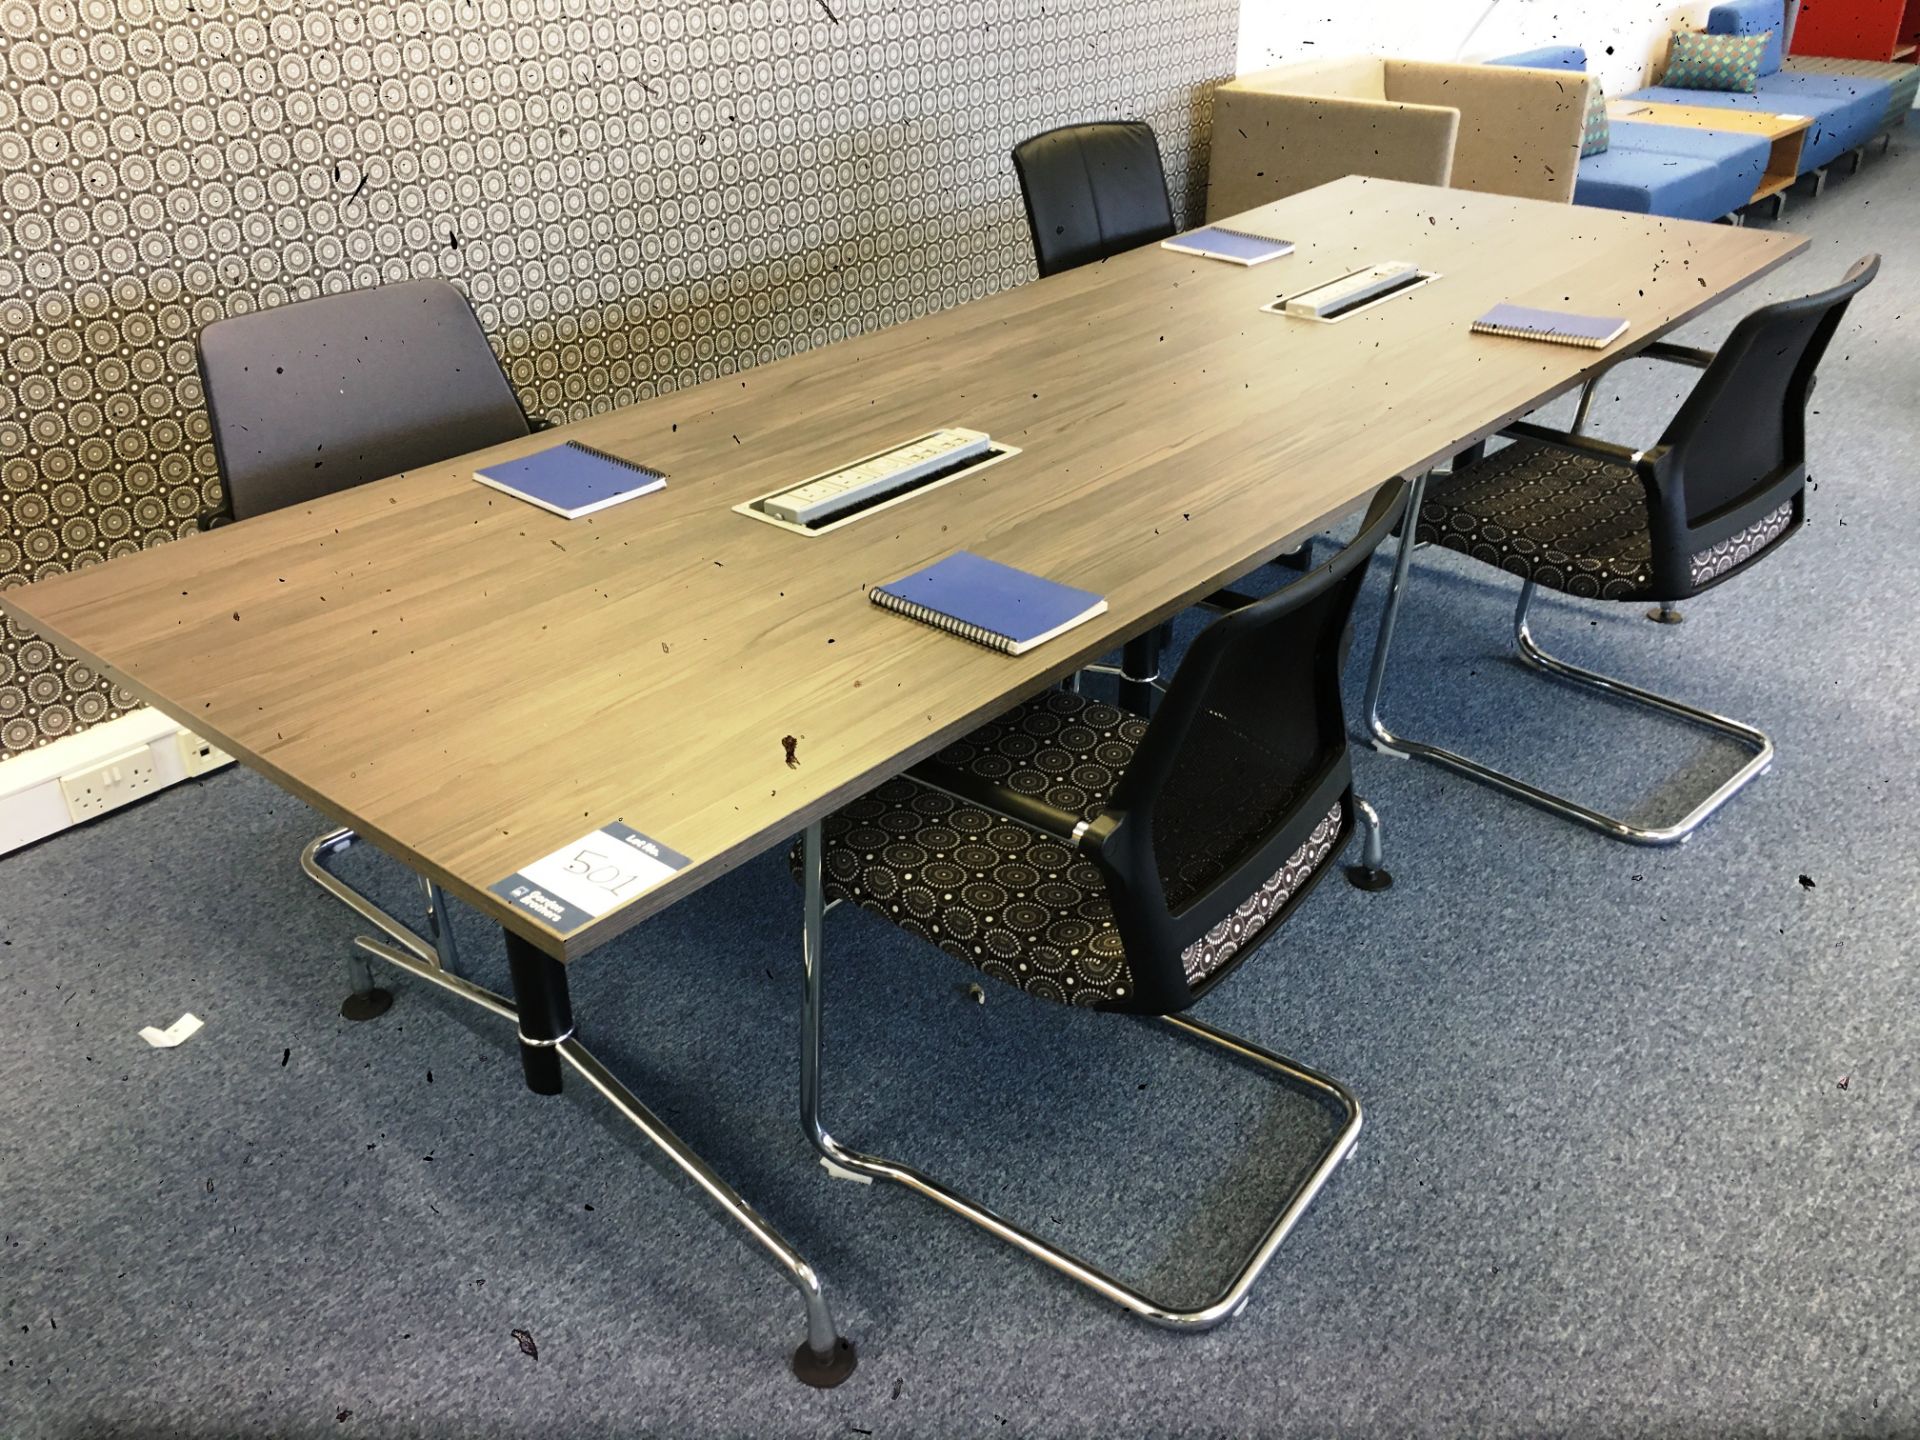 Rectangular boardroom table, L - 300cm x W - 100cm x H - 73cm with (2) integrated power points - Image 2 of 2